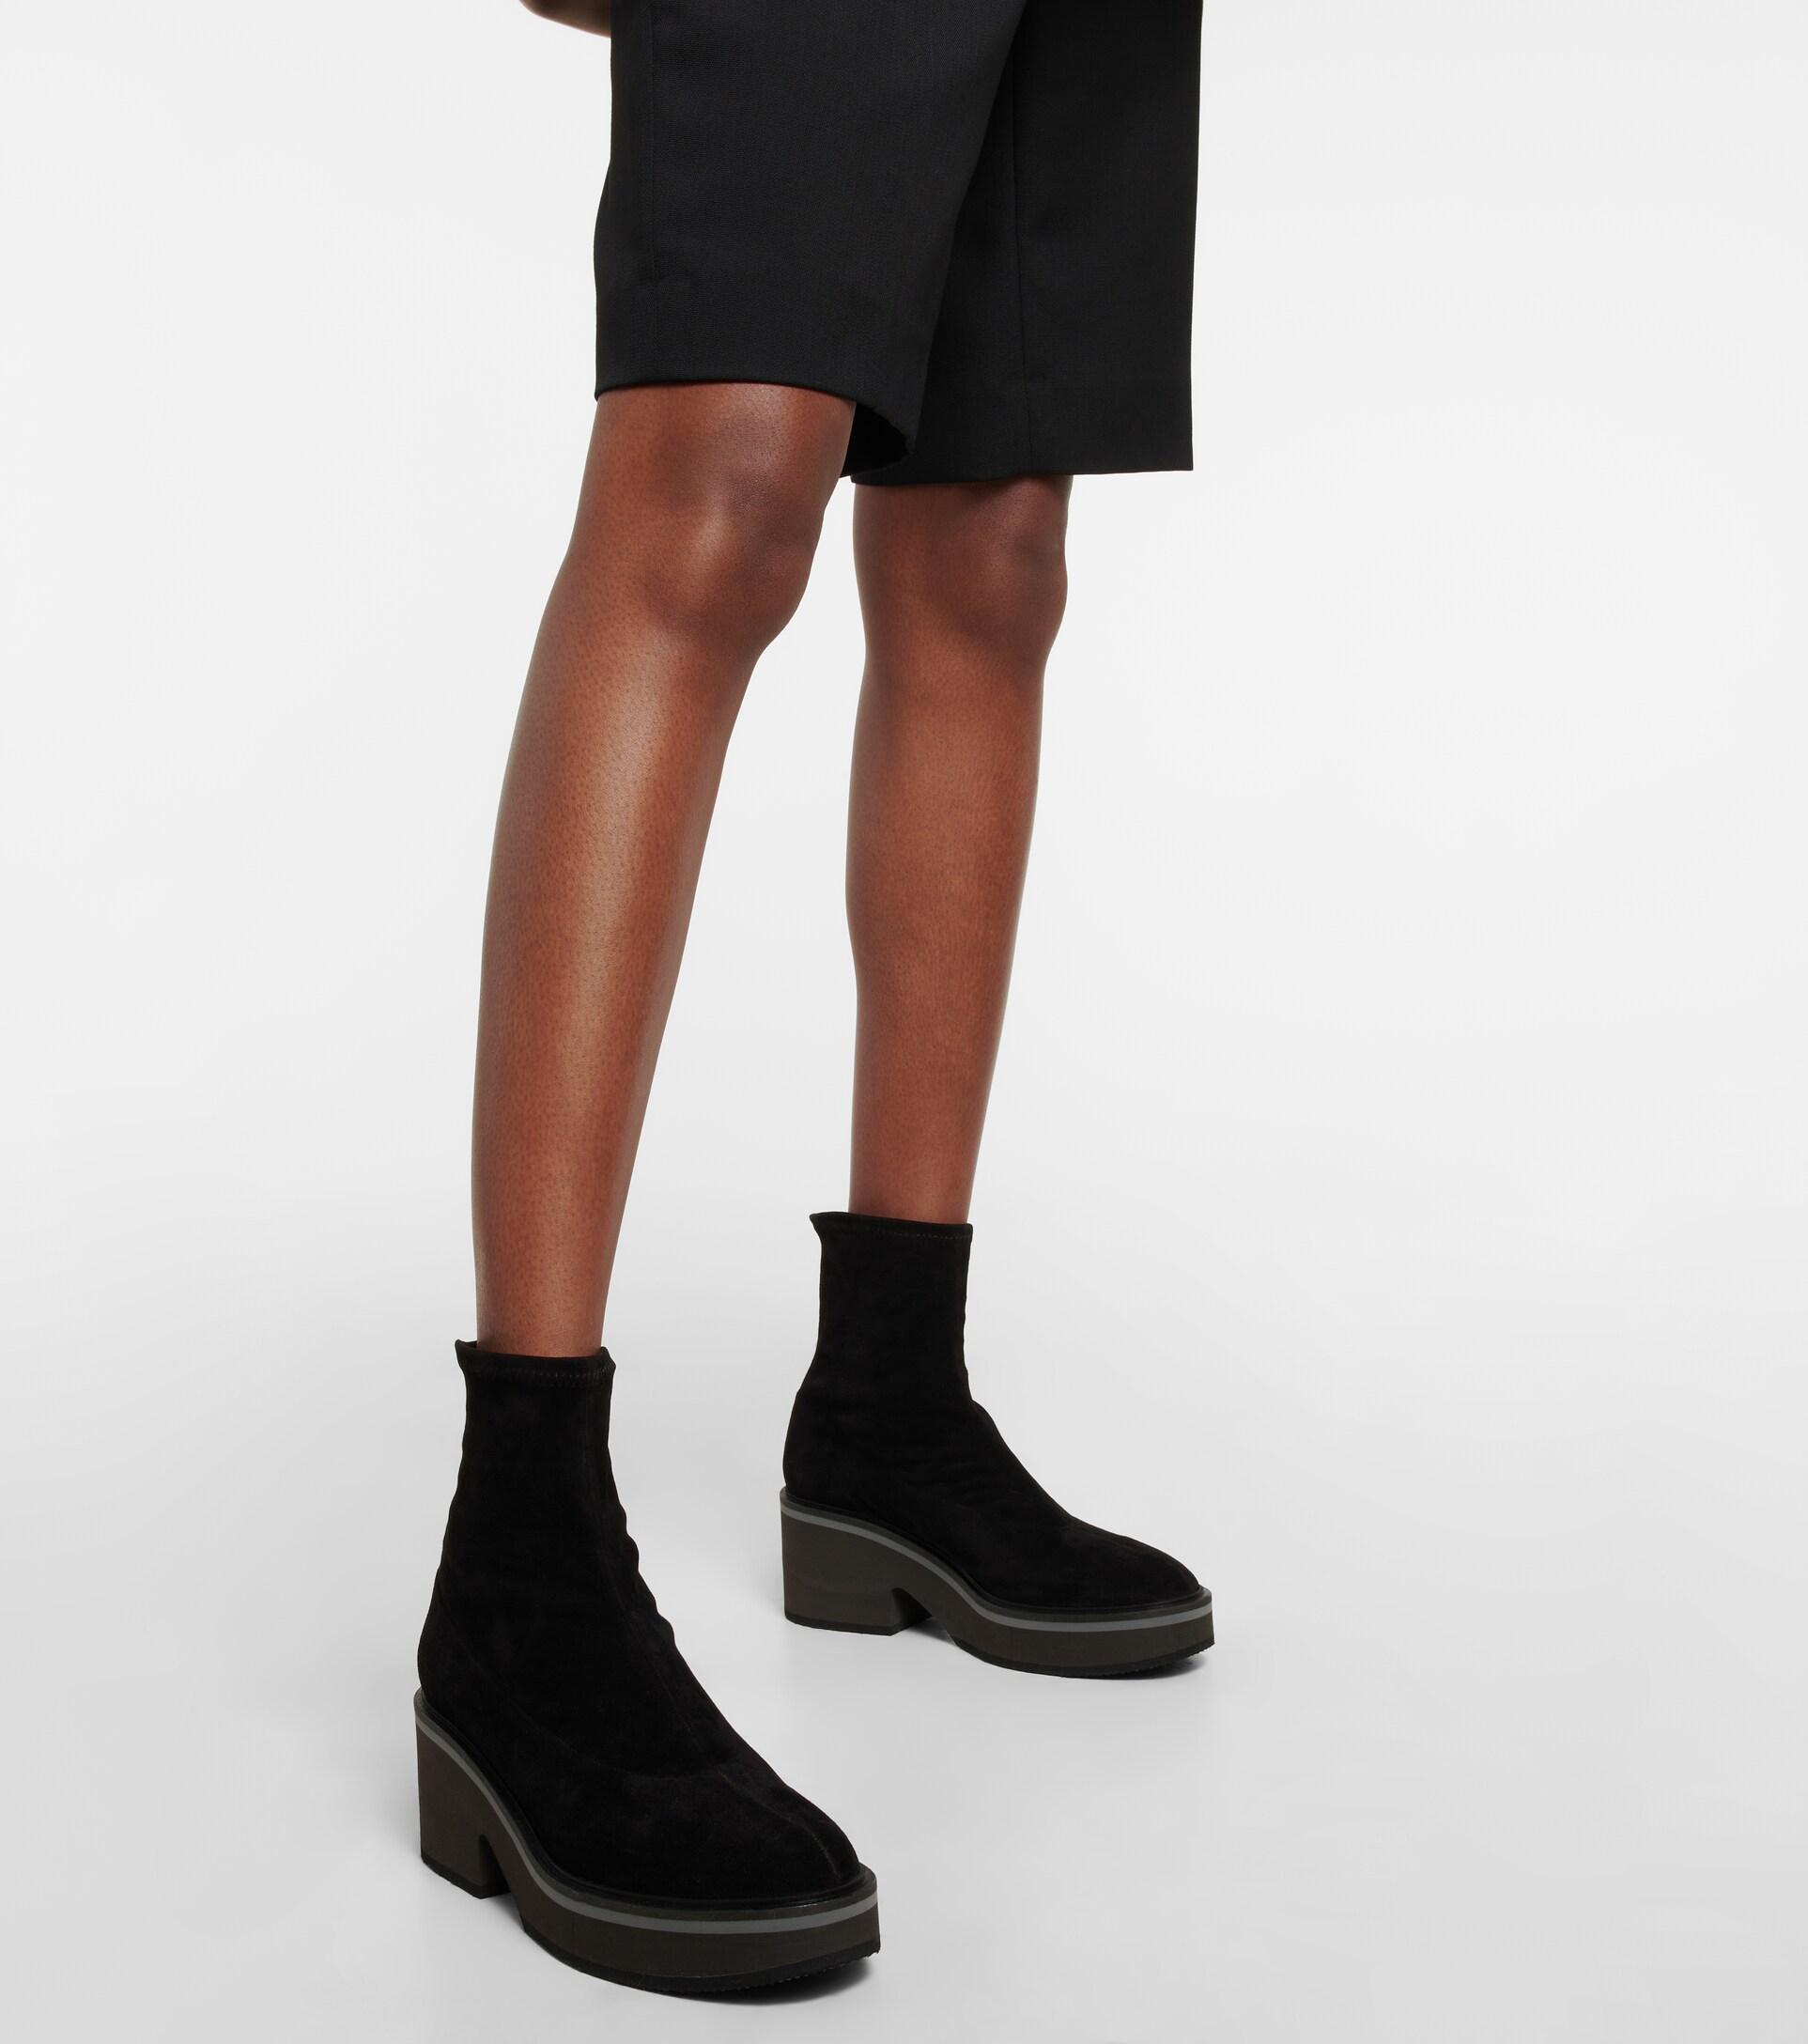 Robert Clergerie Albane Suede Ankle Boots in Black | Lyst